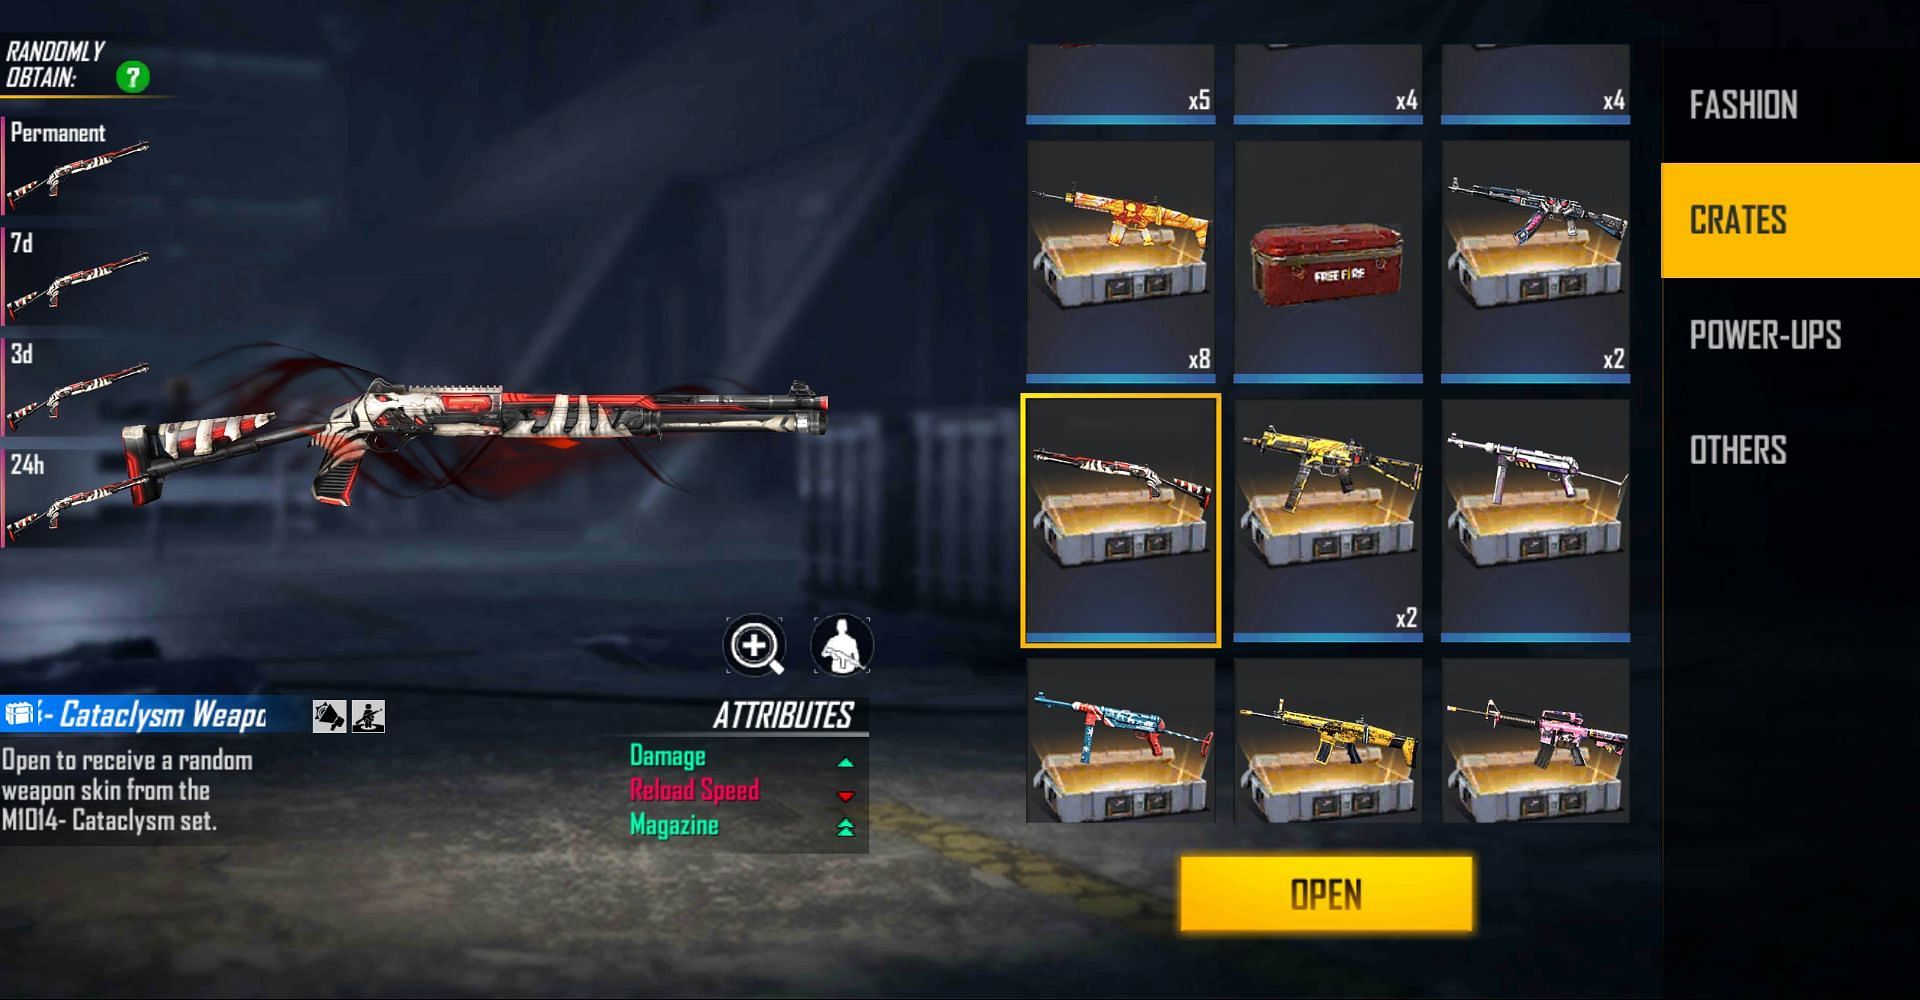 M1014 - Cataclysm Weapon Loot Crate in Free Fire (Image via Free Fire)